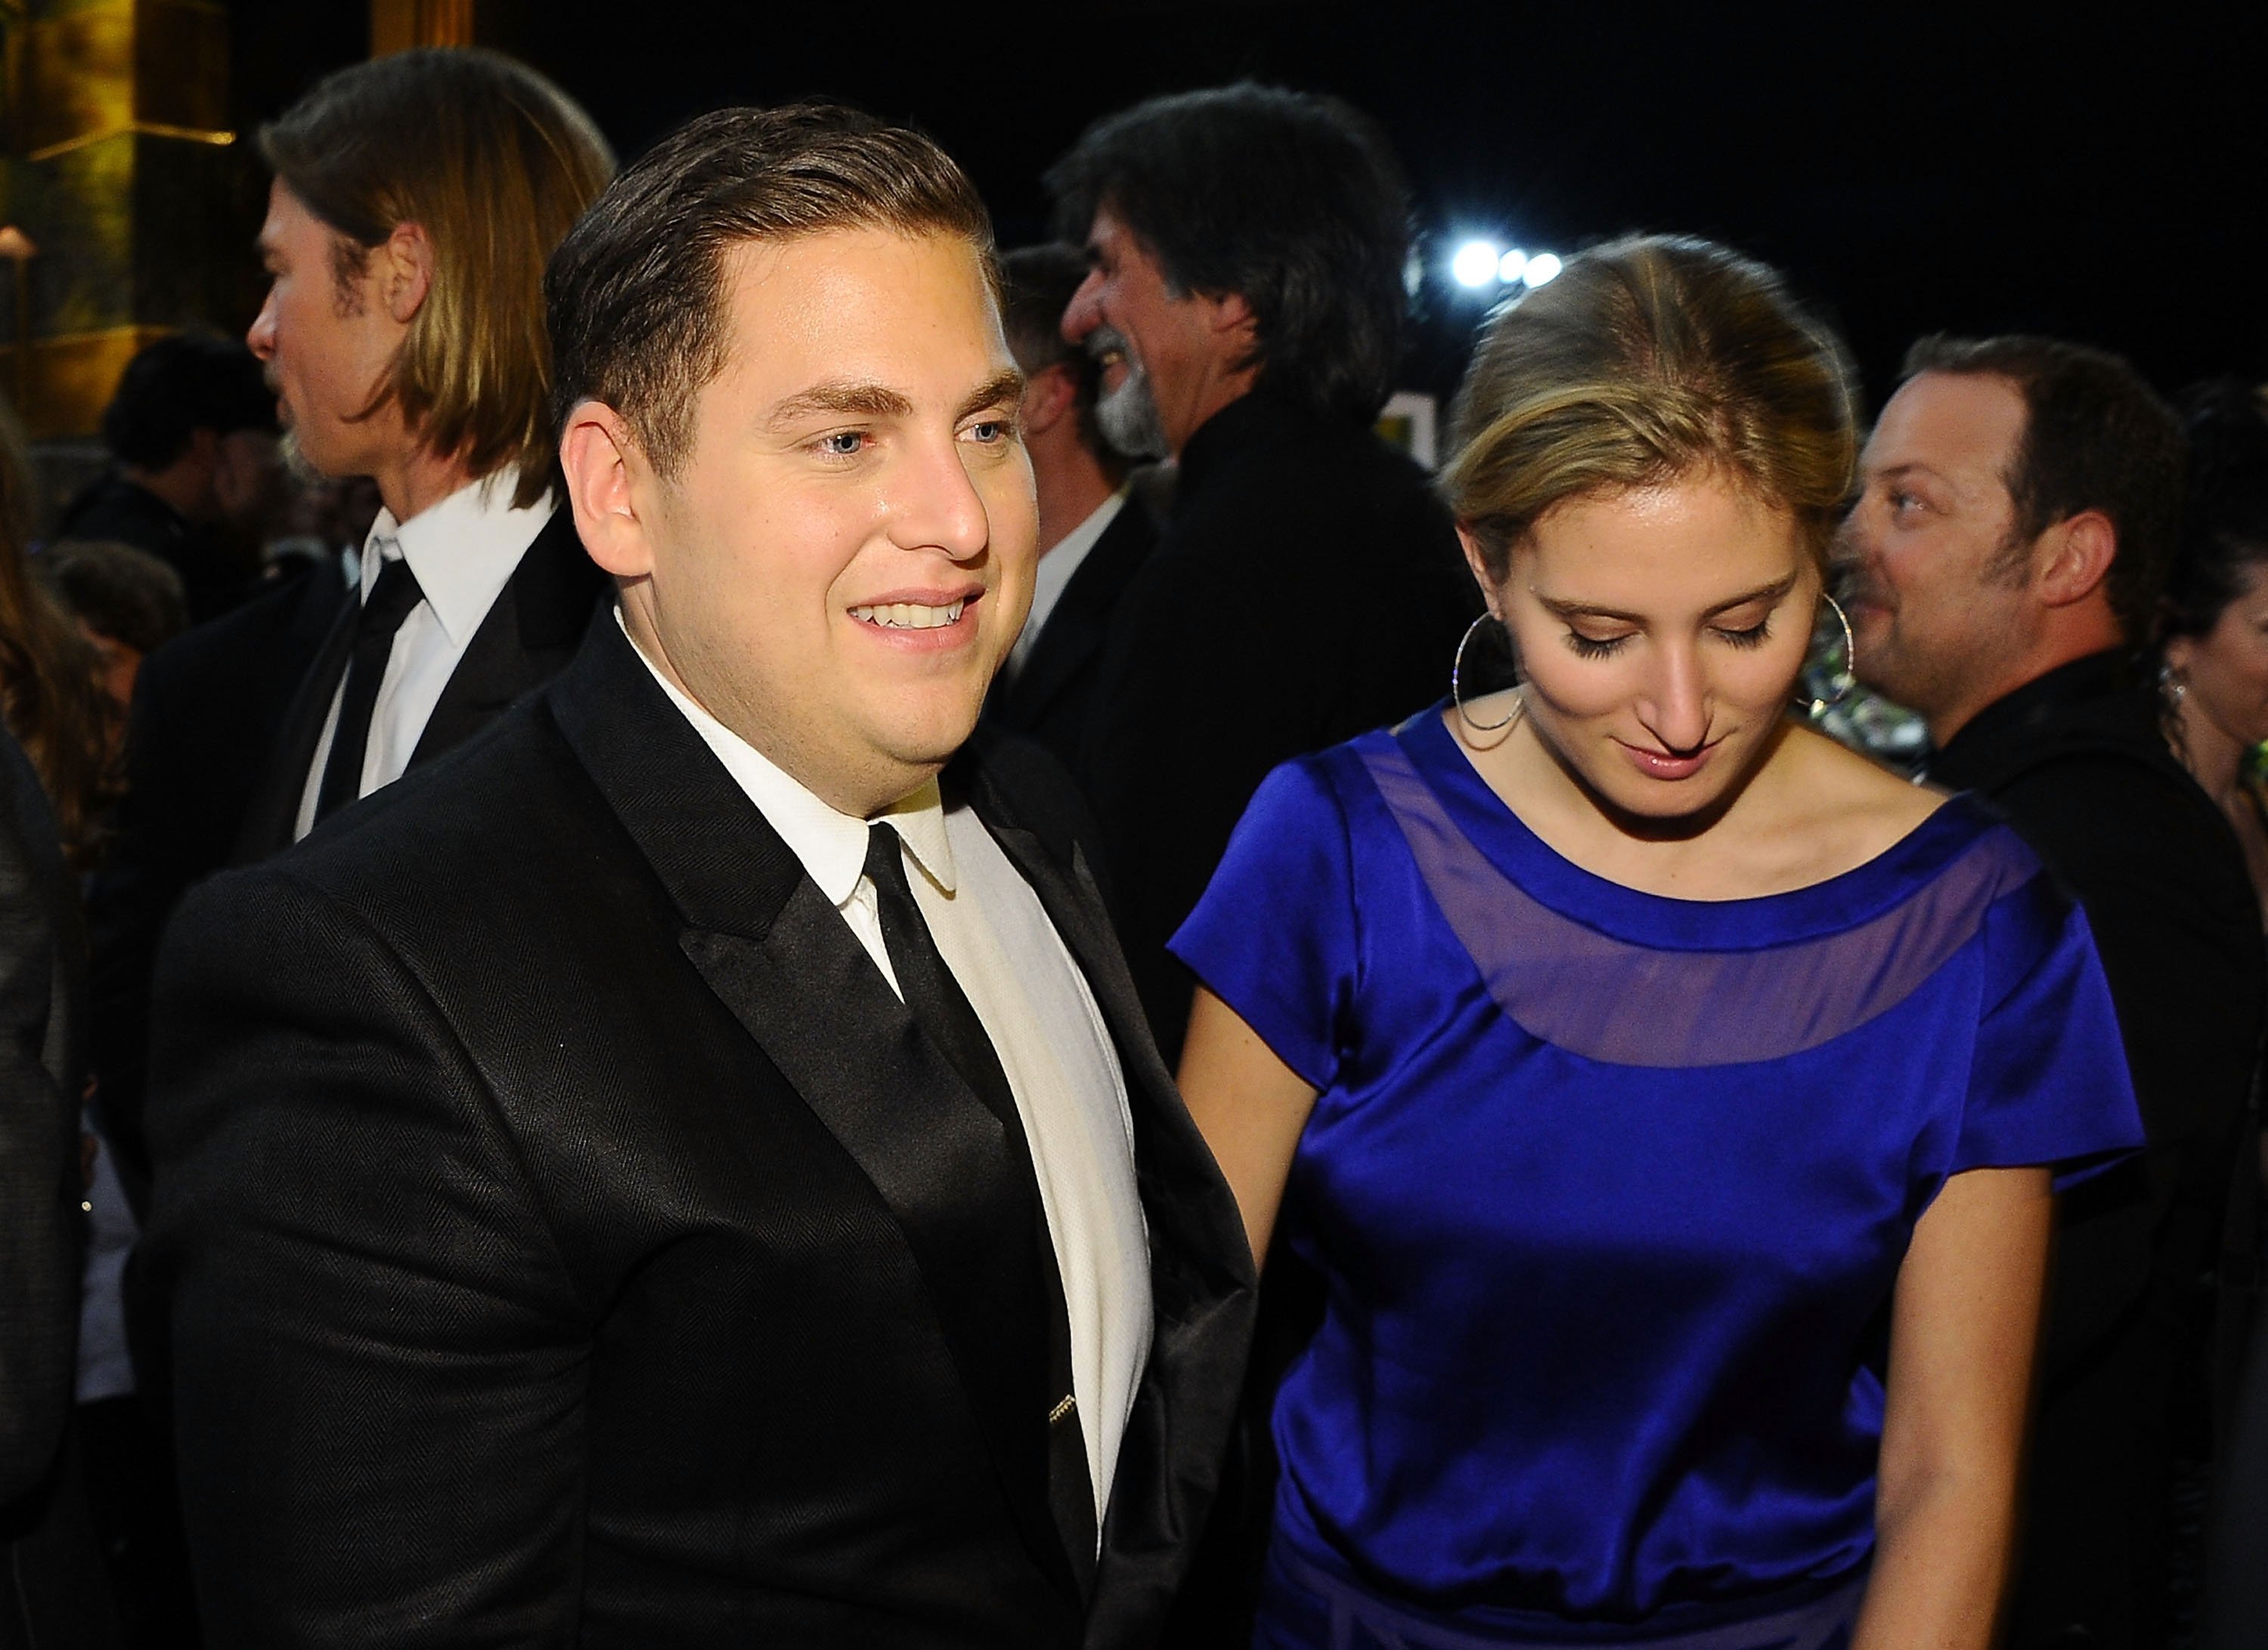 Jonah Hill and Ali Hoffman at the 18th Annual Screen Actors Guild Awards hosted at The Shrine Auditorium in Los Angeles, California, on January 29, 2012. | Source: Getty Images